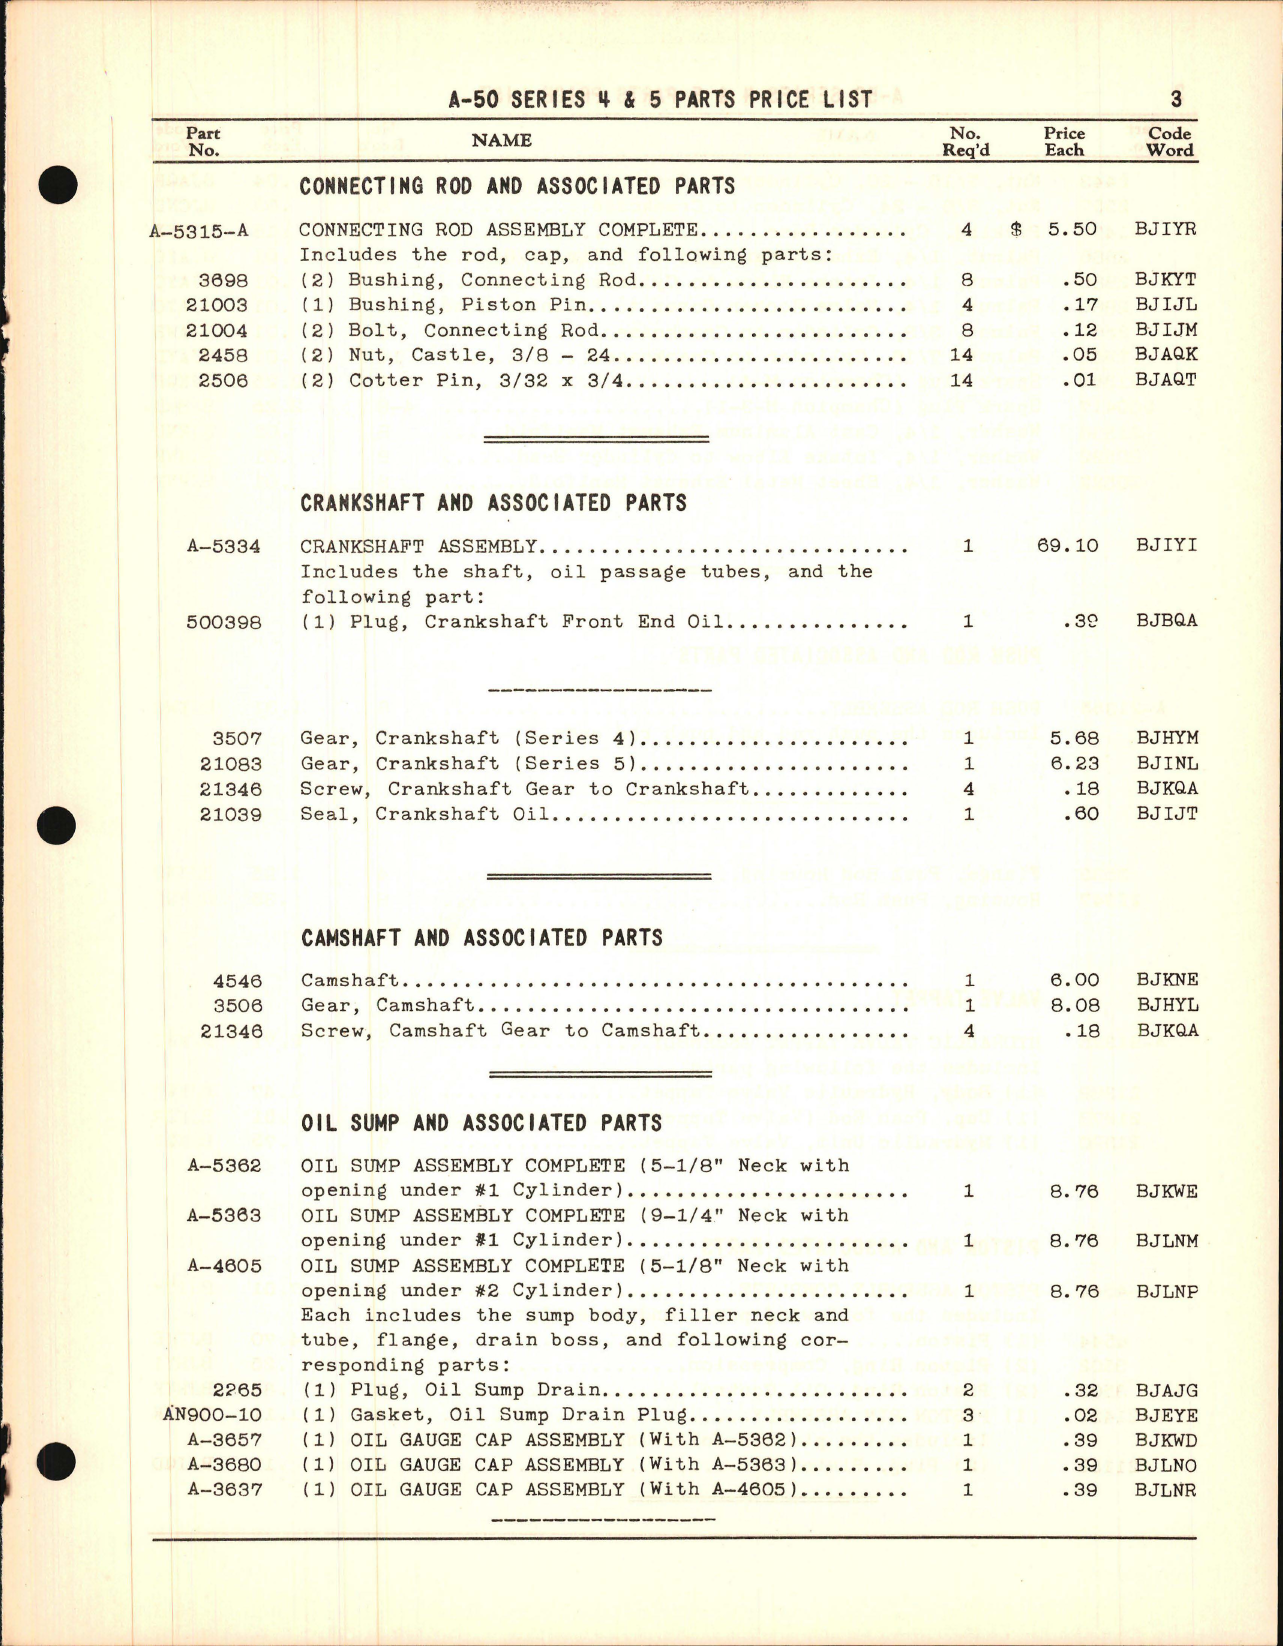 Sample page 5 from AirCorps Library document: Parts Price List for Continental A-50 Series 4 and 5